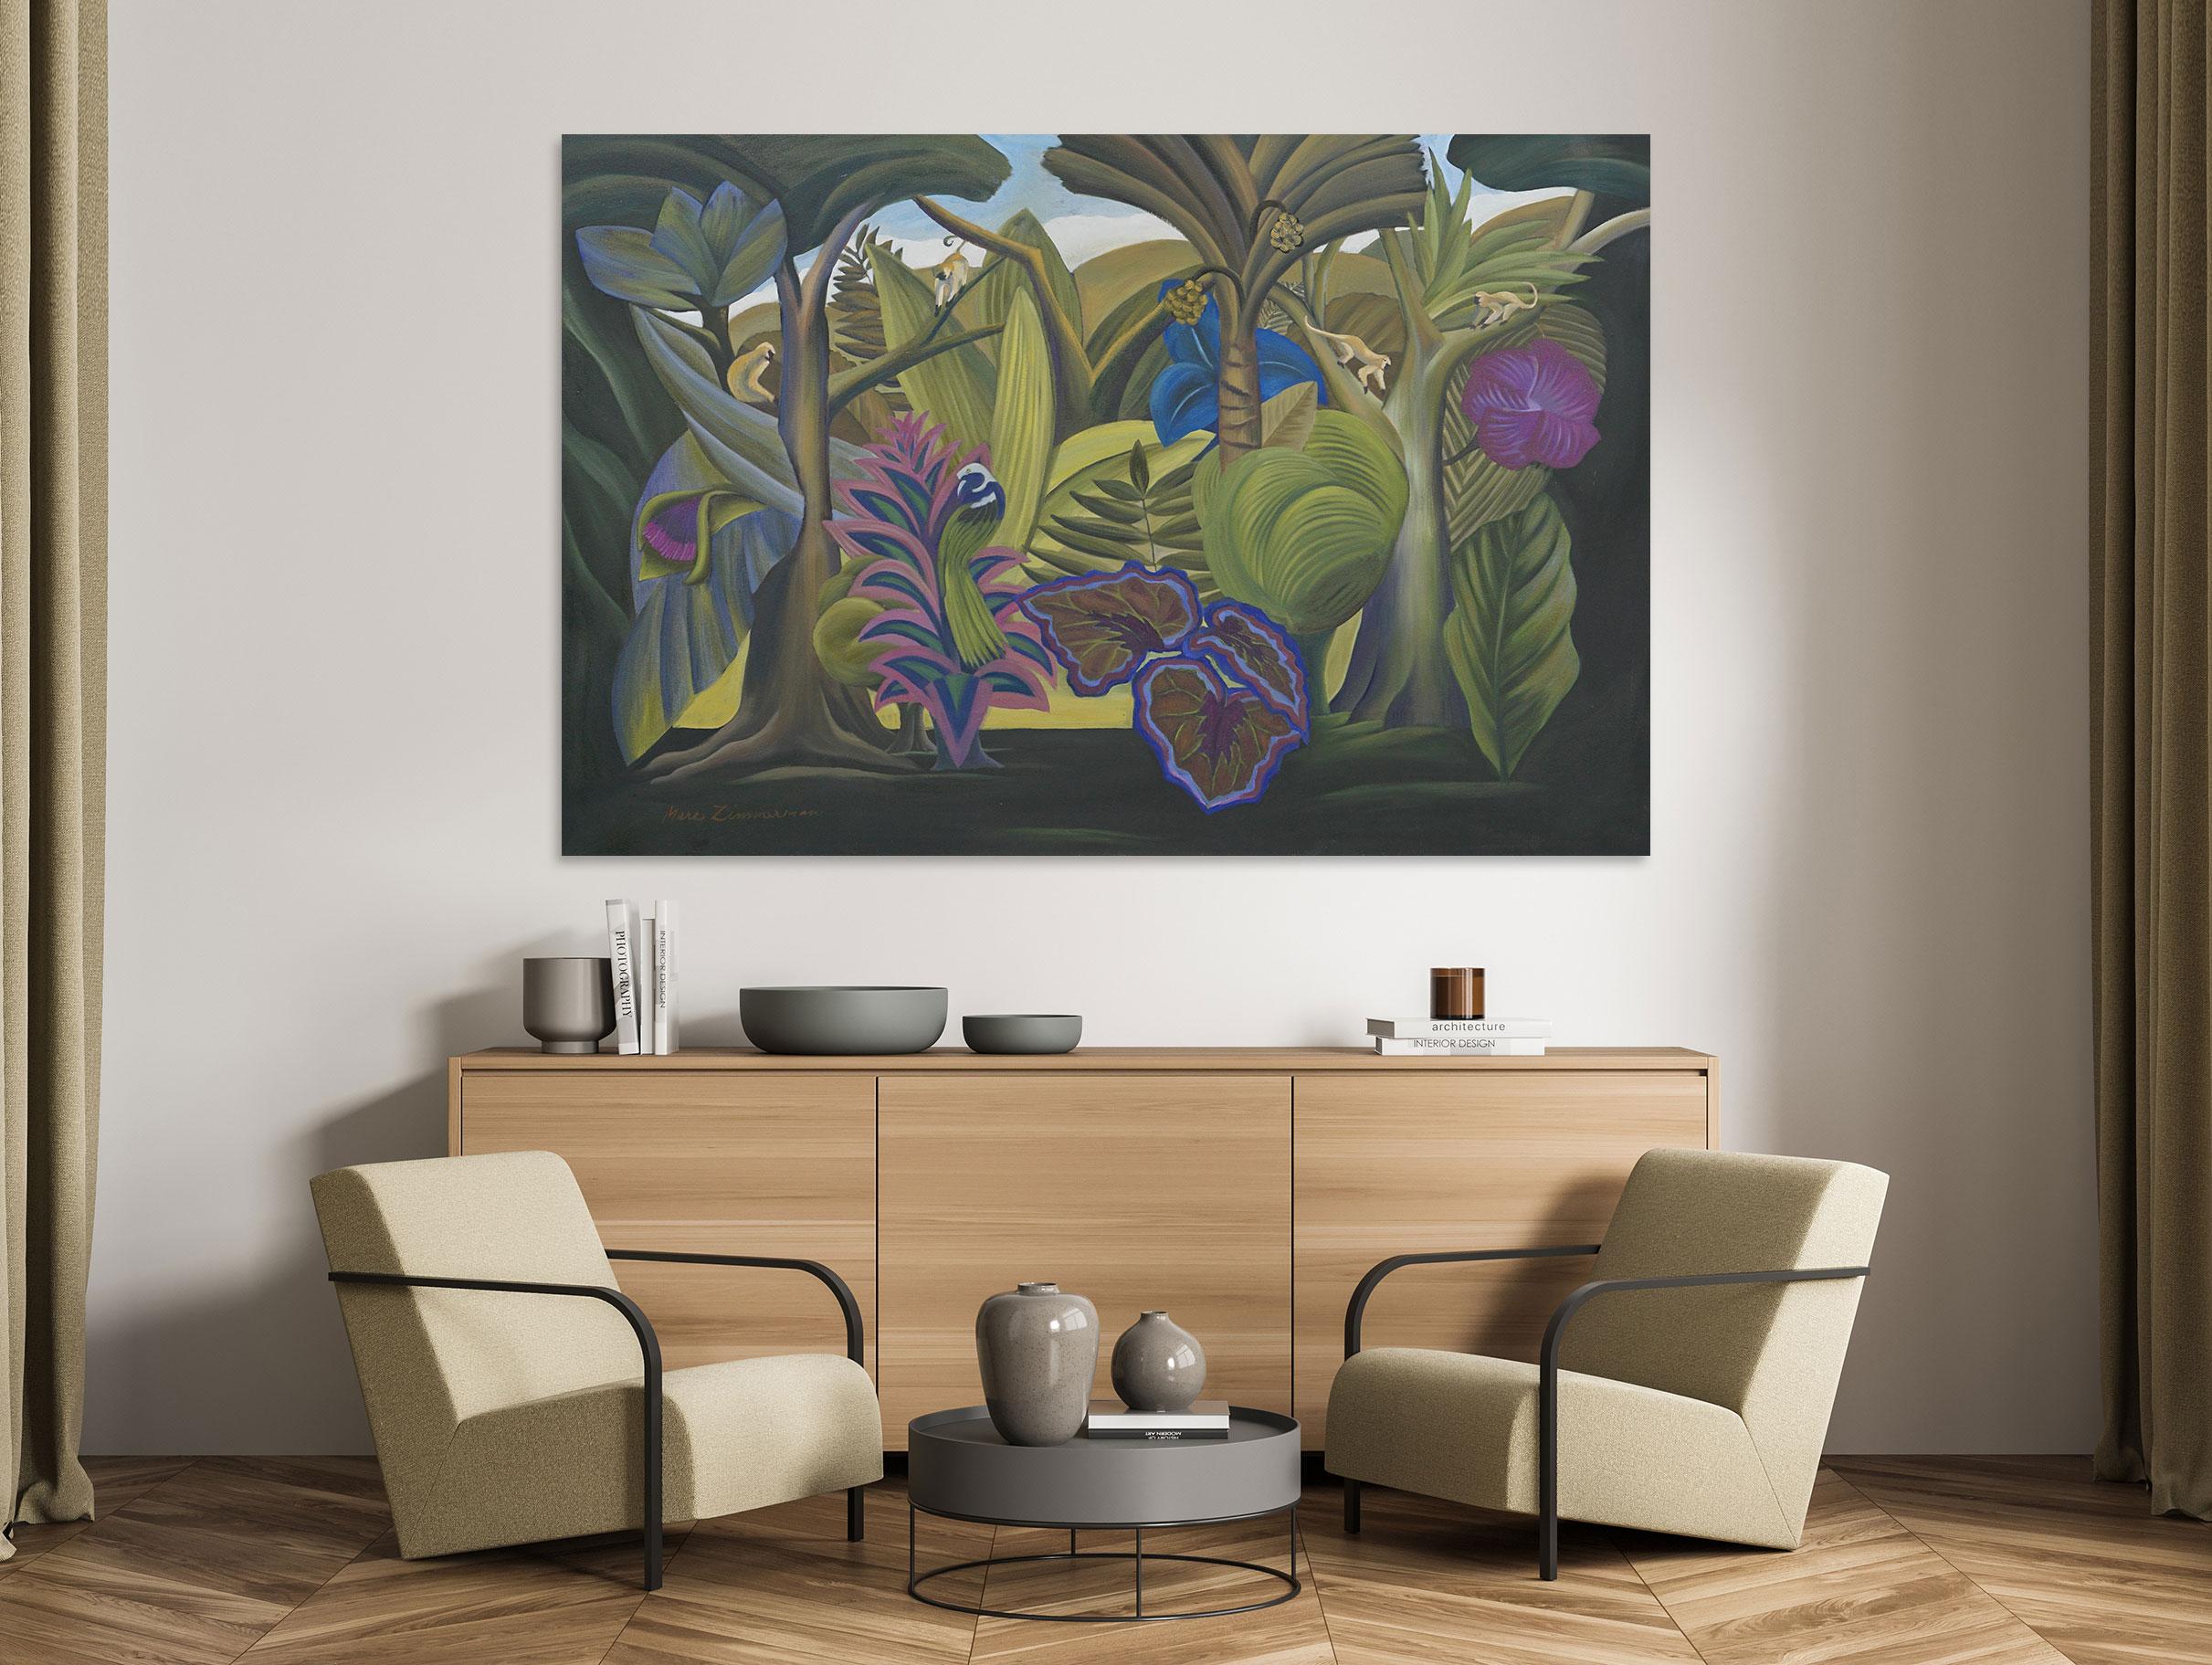 A smooth verdant, surreal jungle with monkeys playfully enjoying, exotic colored flowers and a tropical bird completes the fantasy.

Jungle Fantasy with Exotic Bird - Landscape Painting - Conceptual Art By Marc Zimmerman

This masterpiece is